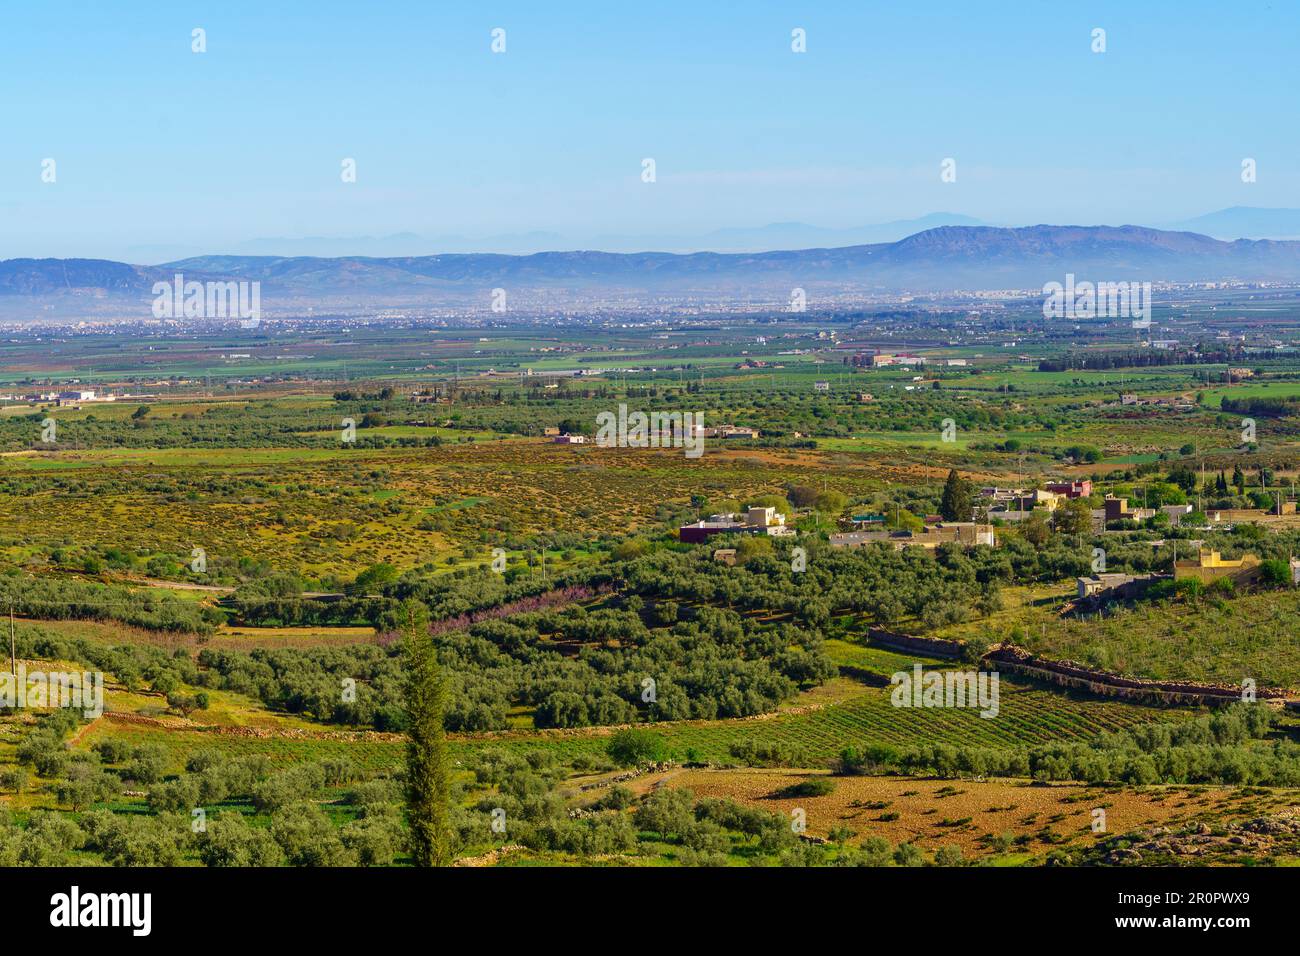 View of landscape in Sefrou, Middle Atlas Mountains, Morocco Stock Photo